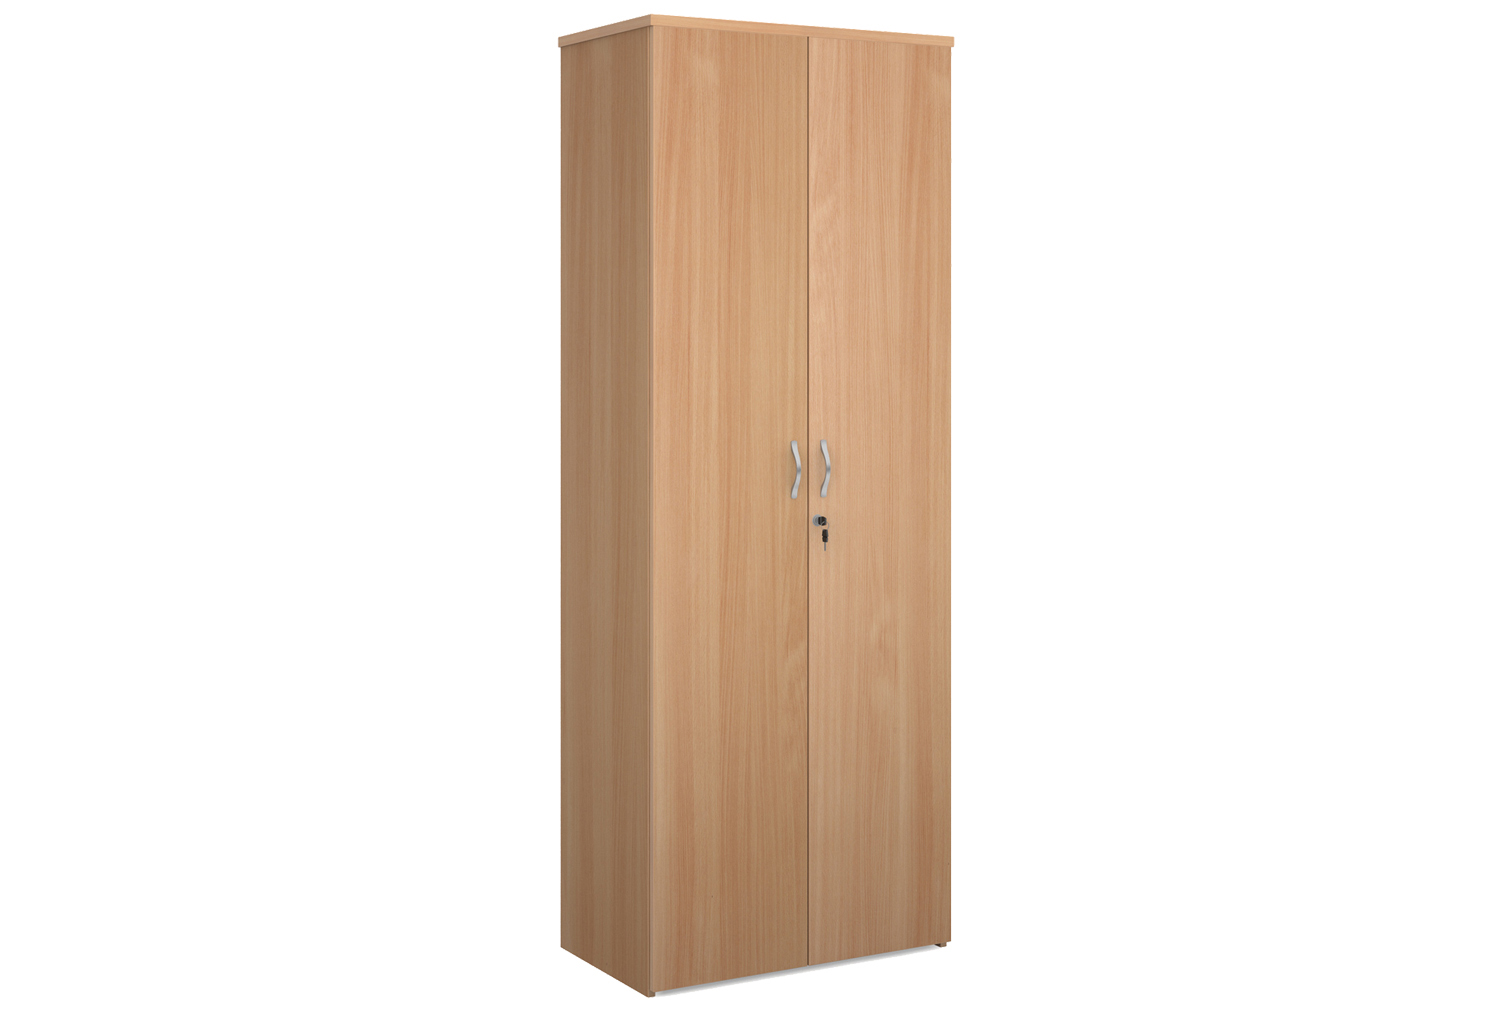 Tully Double Door Office Cupboards, 5 Shelf - 80wx47dx214h (cm), Beech, Fully Installed